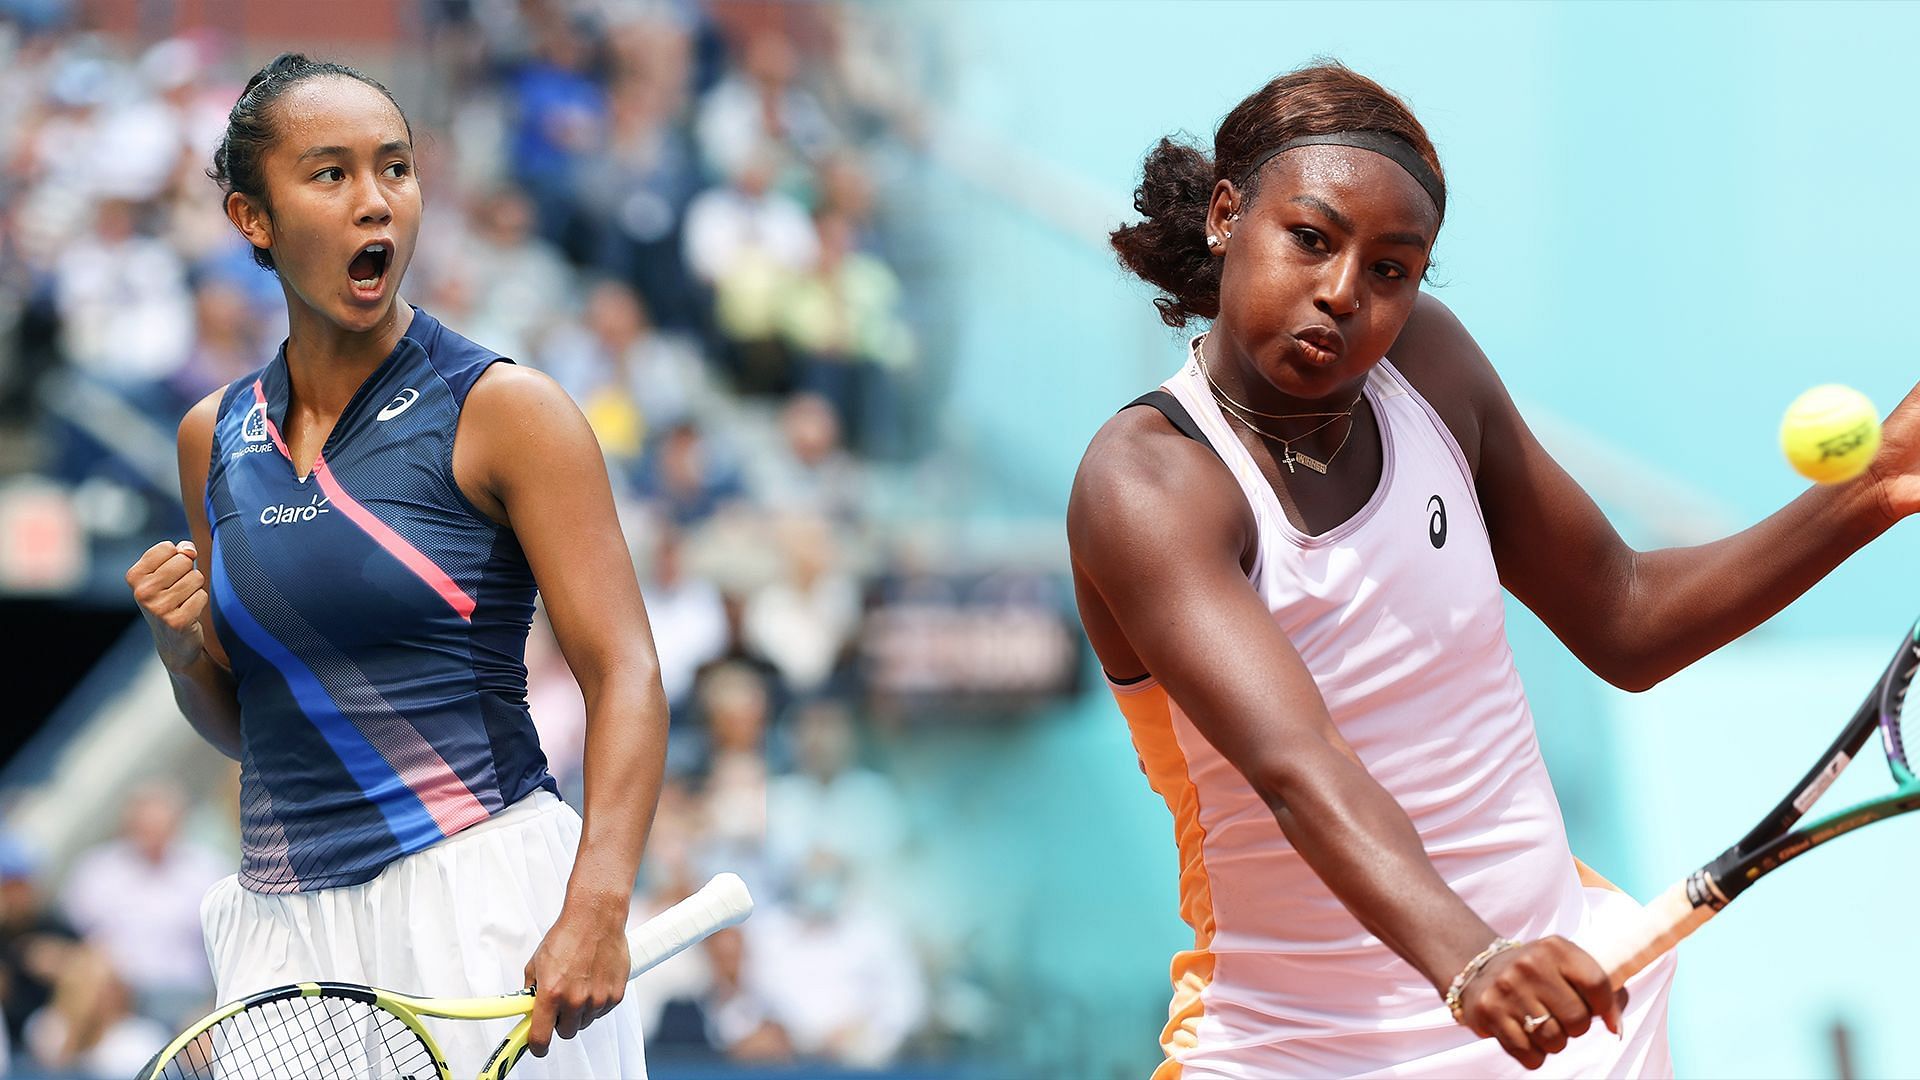 Leylah Fernandez vs Alycia Parks is one of the first-round matches at the 2023 Bad Homburg Open.